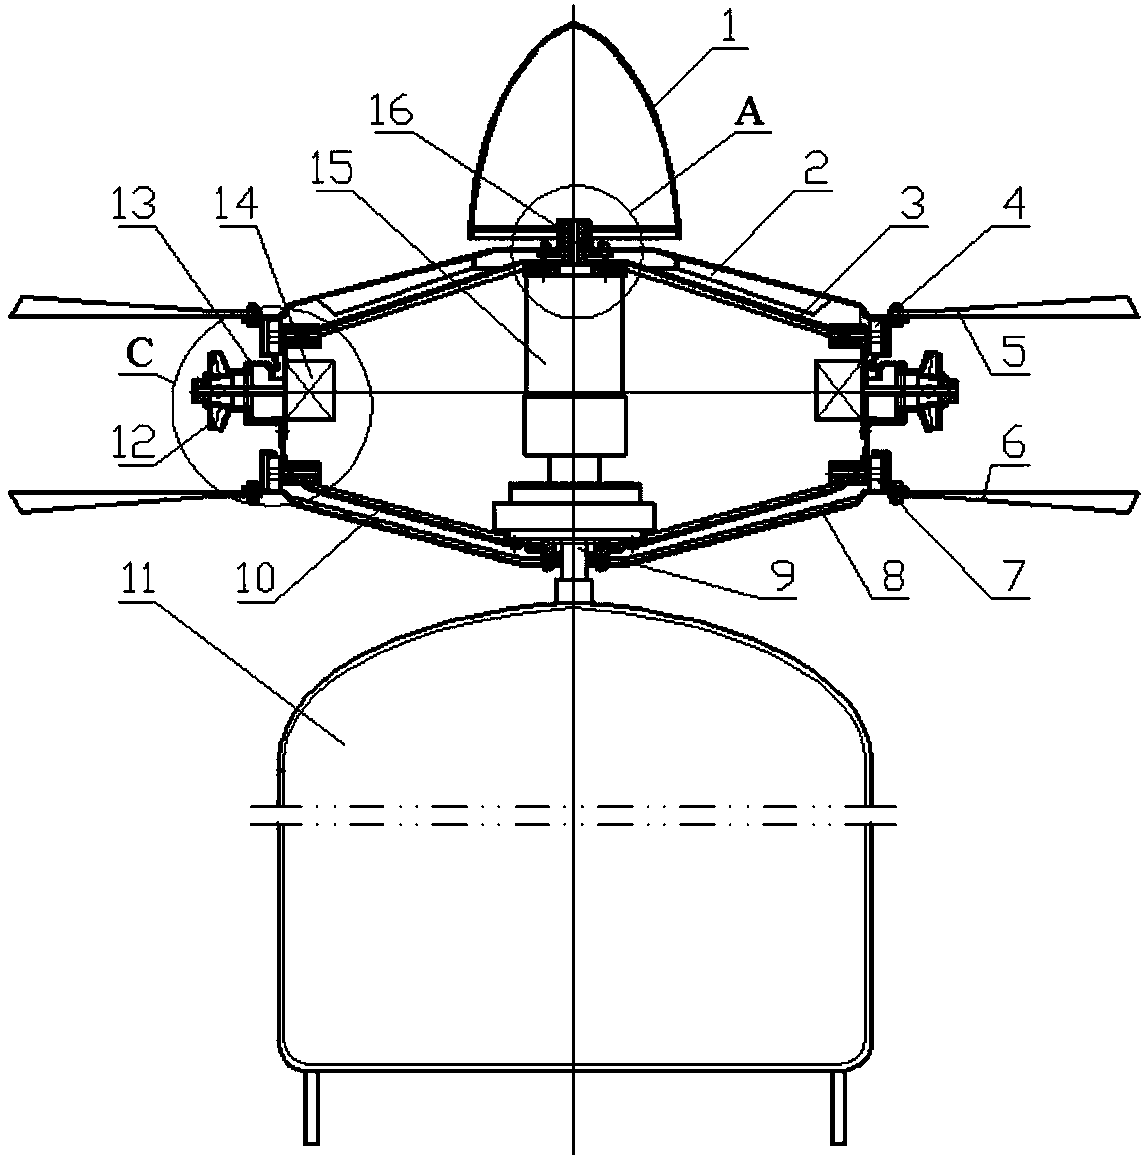 Rudder-controlled jet double-rotor aircraft